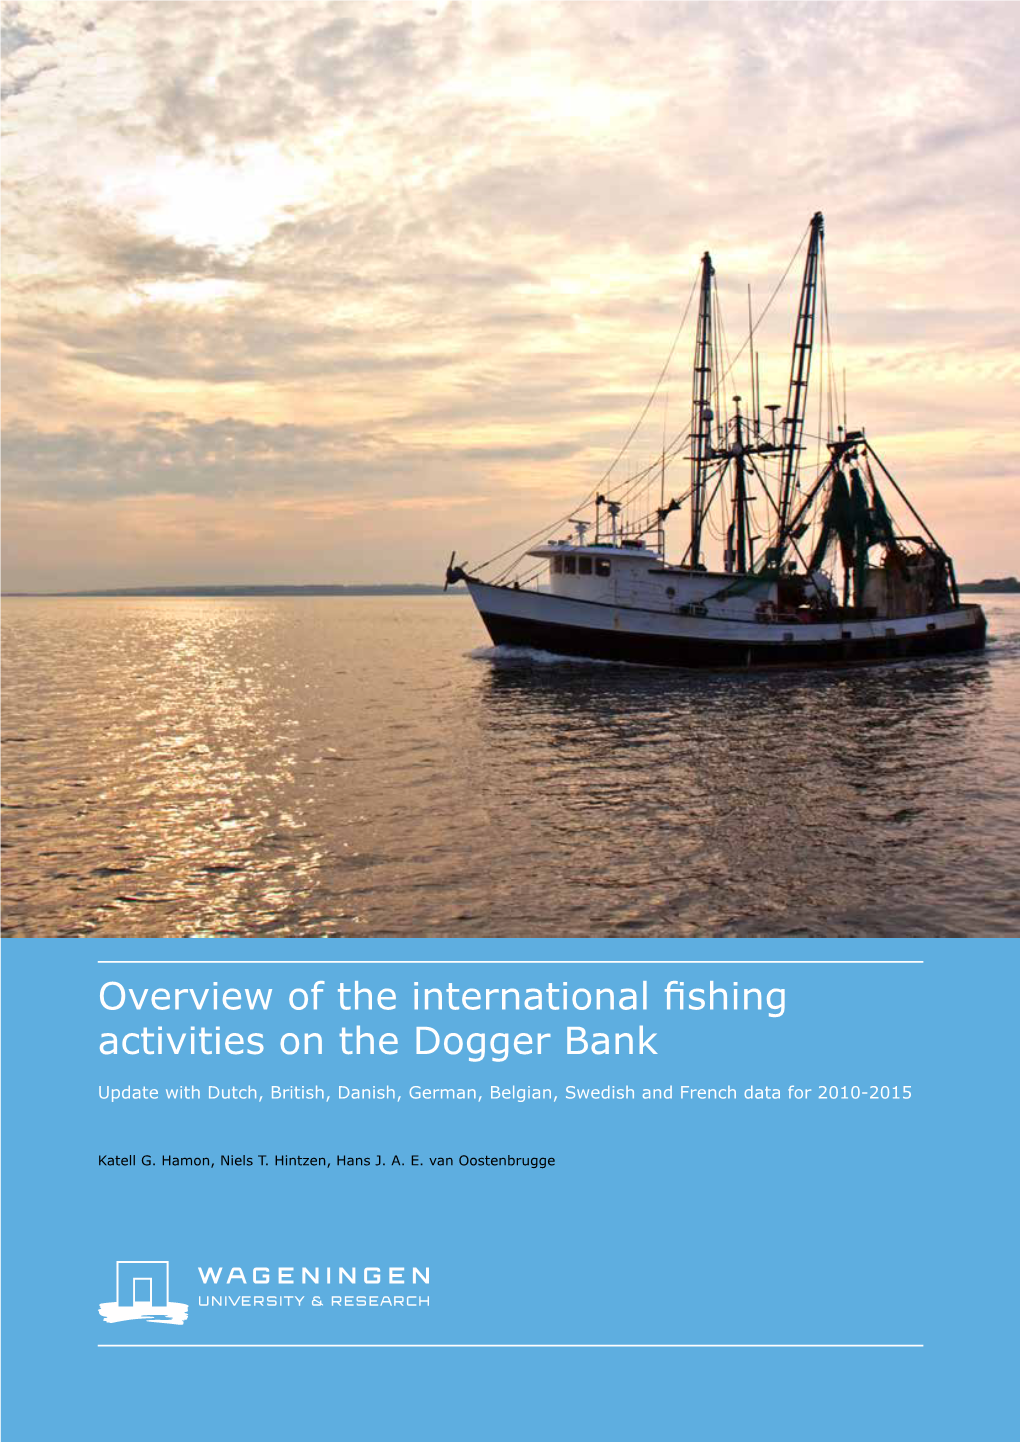 Overview of the International Fishing Activities on the Dogger Bank